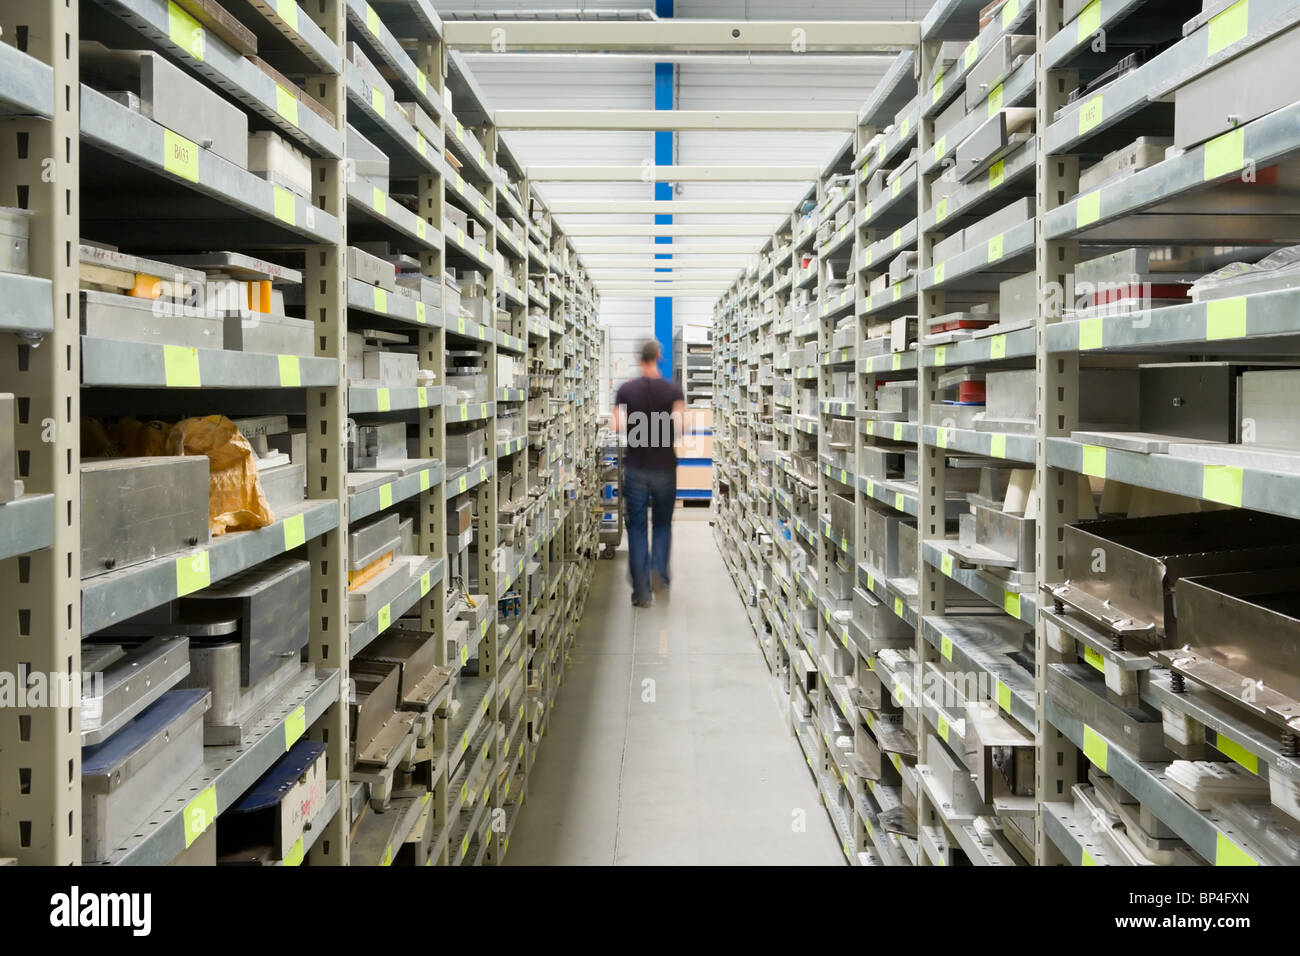 Metal Shelves With Spare Parts And Technician In Plant interior Stock Photo